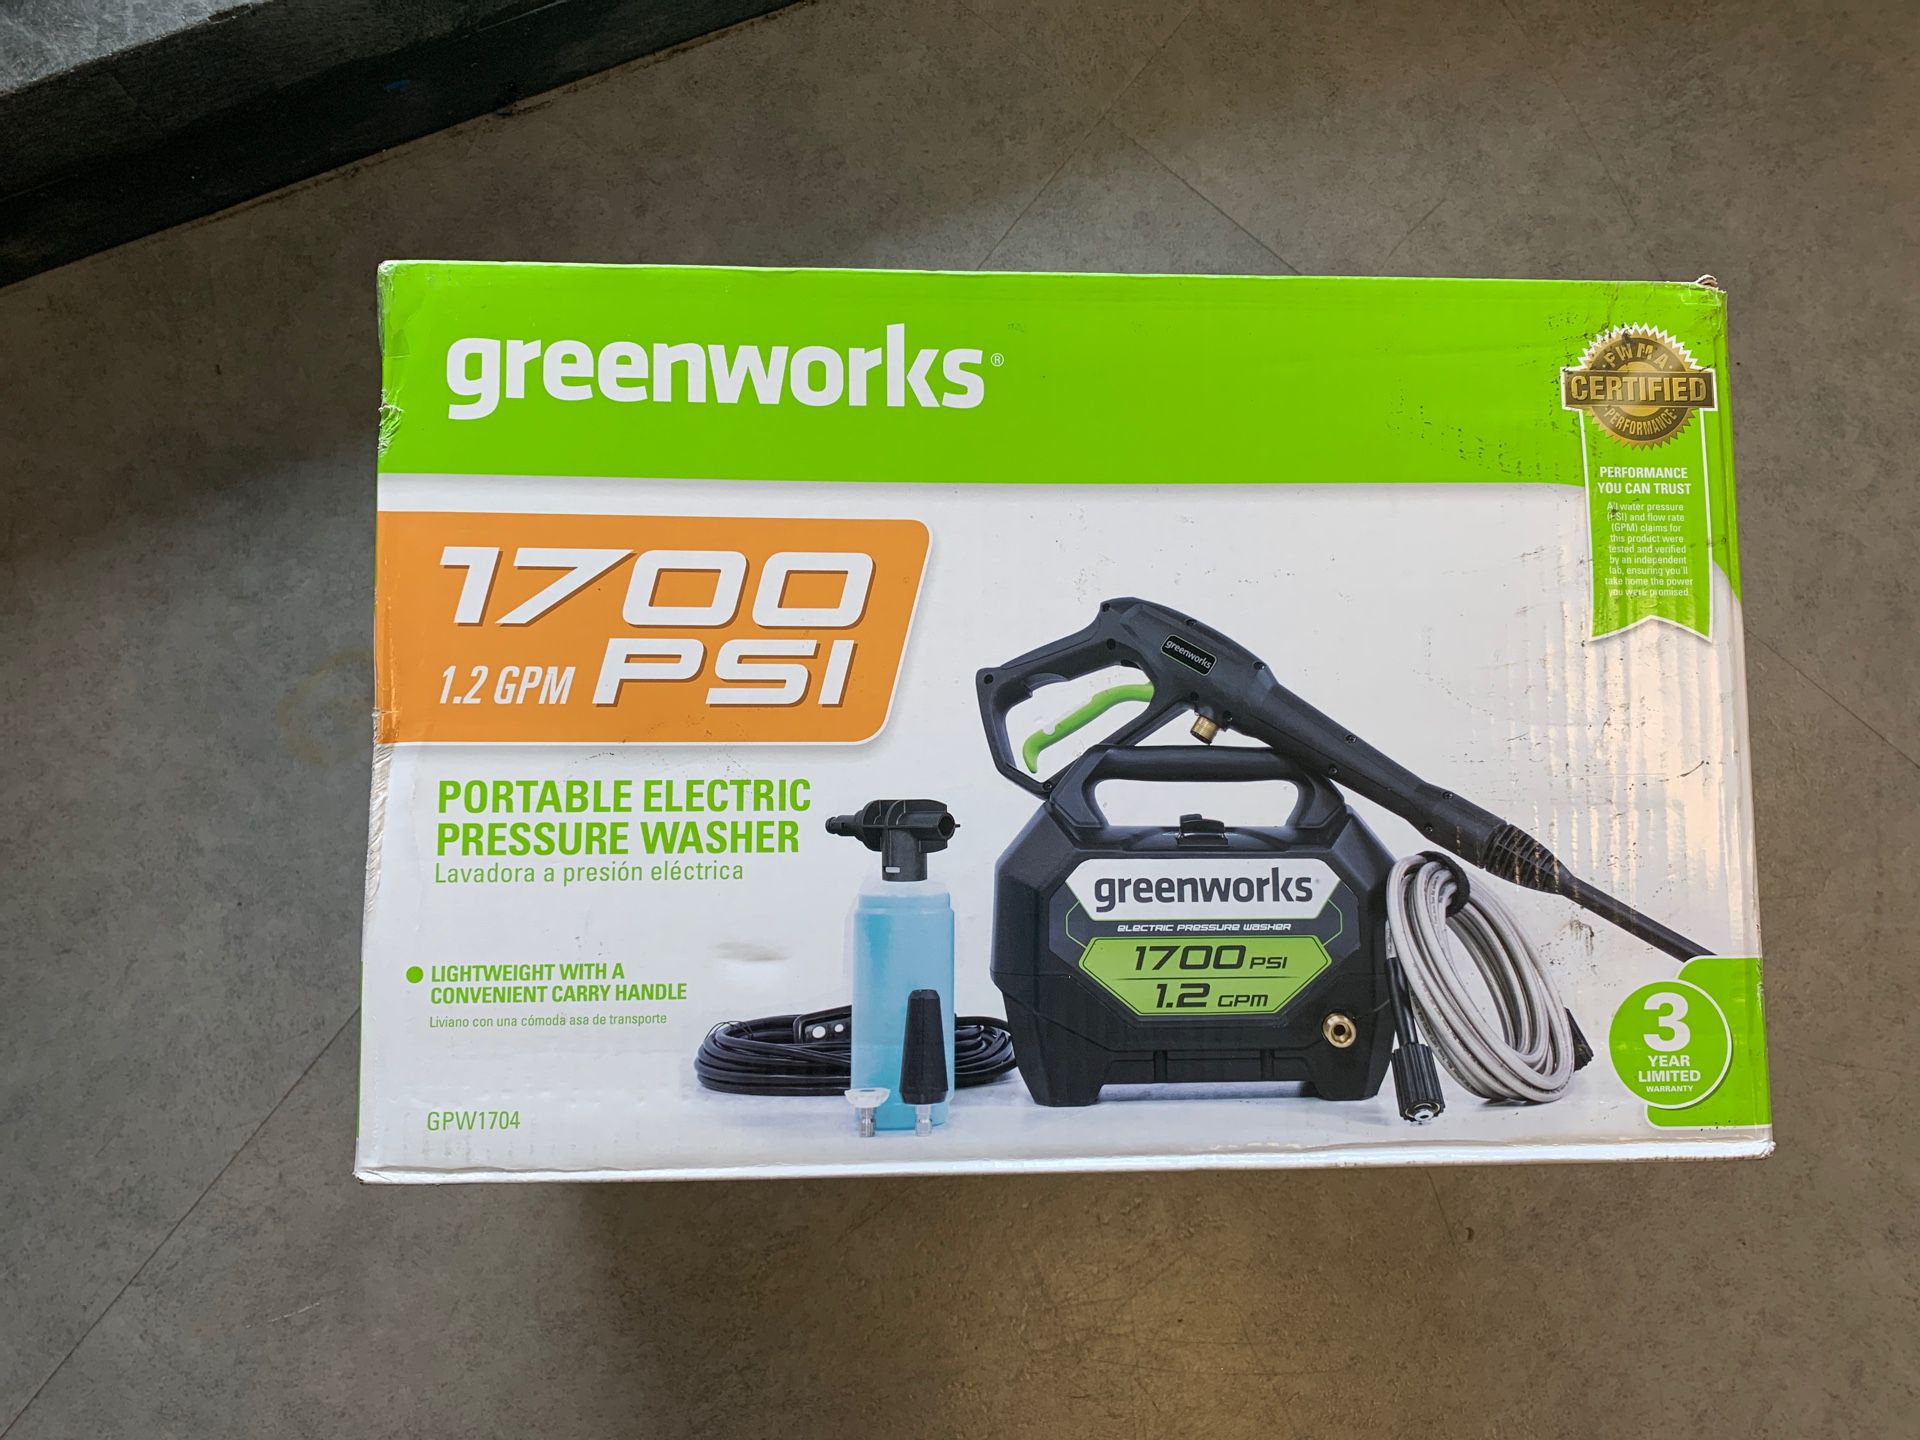 Greenworks 1700 portable electric pressure washer in box